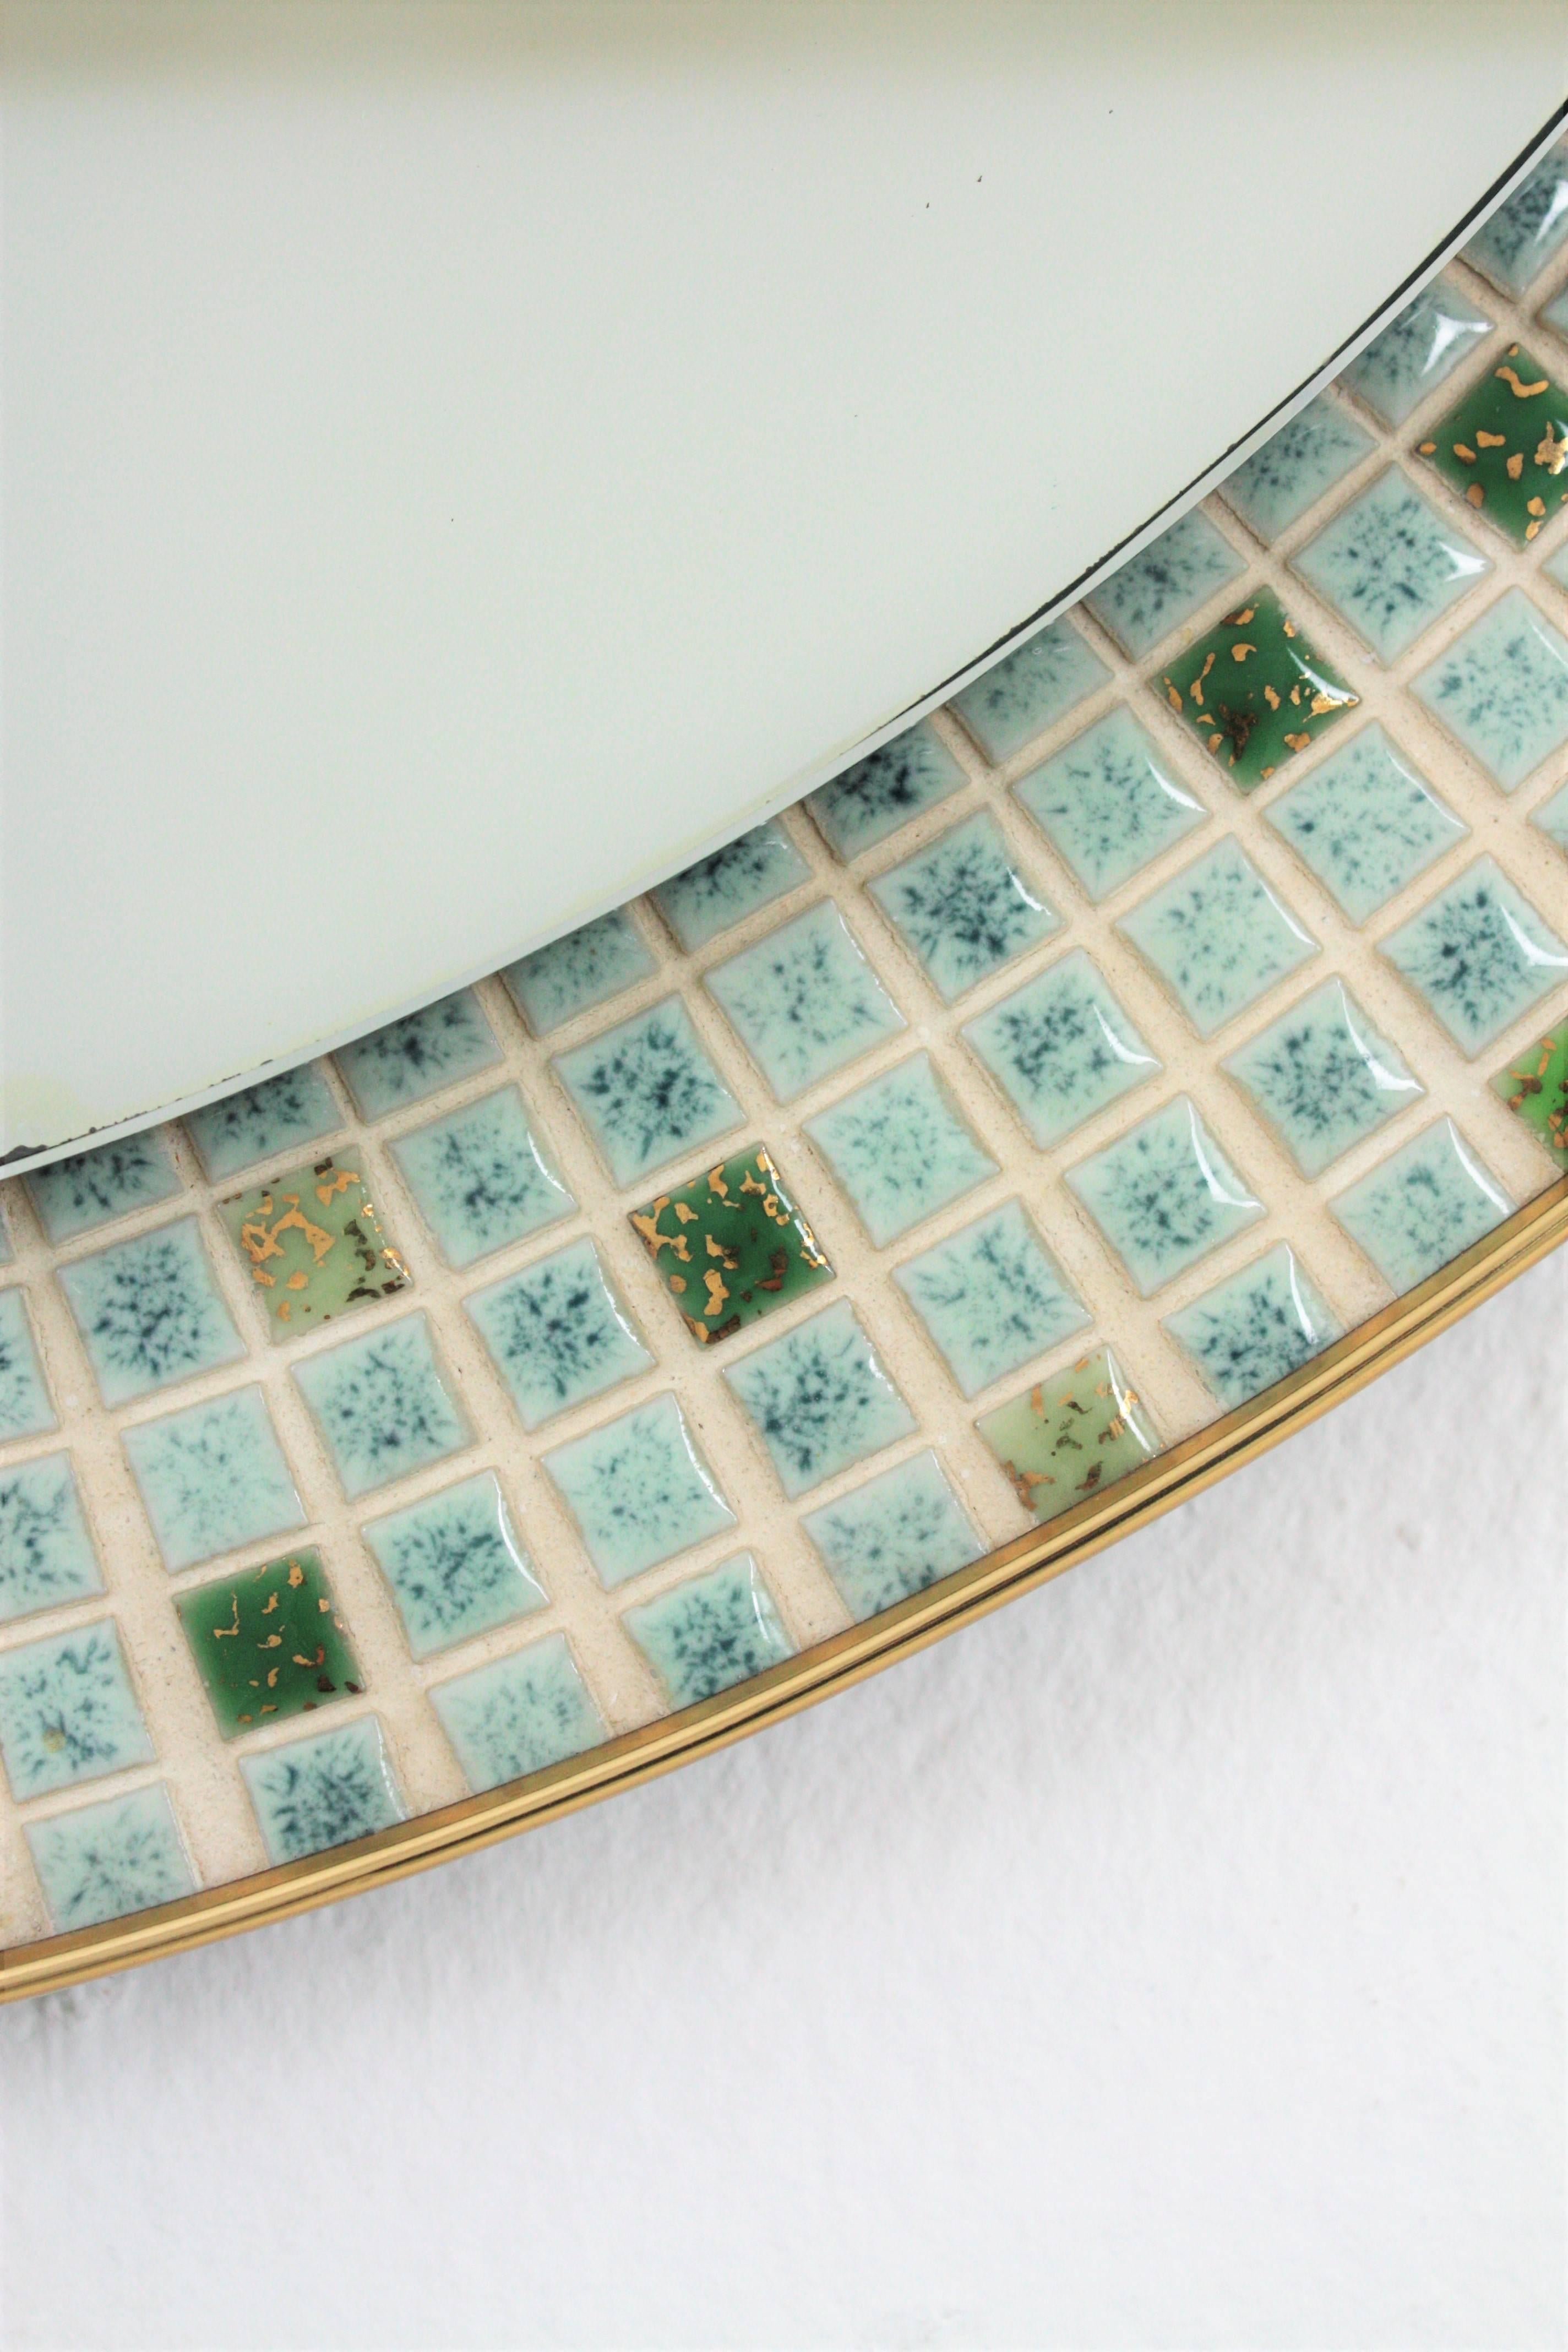 Mid-Century Modern Round Wall Mirror with Ceramic Tiles Mosaic Frame, Spain, 1960s For Sale